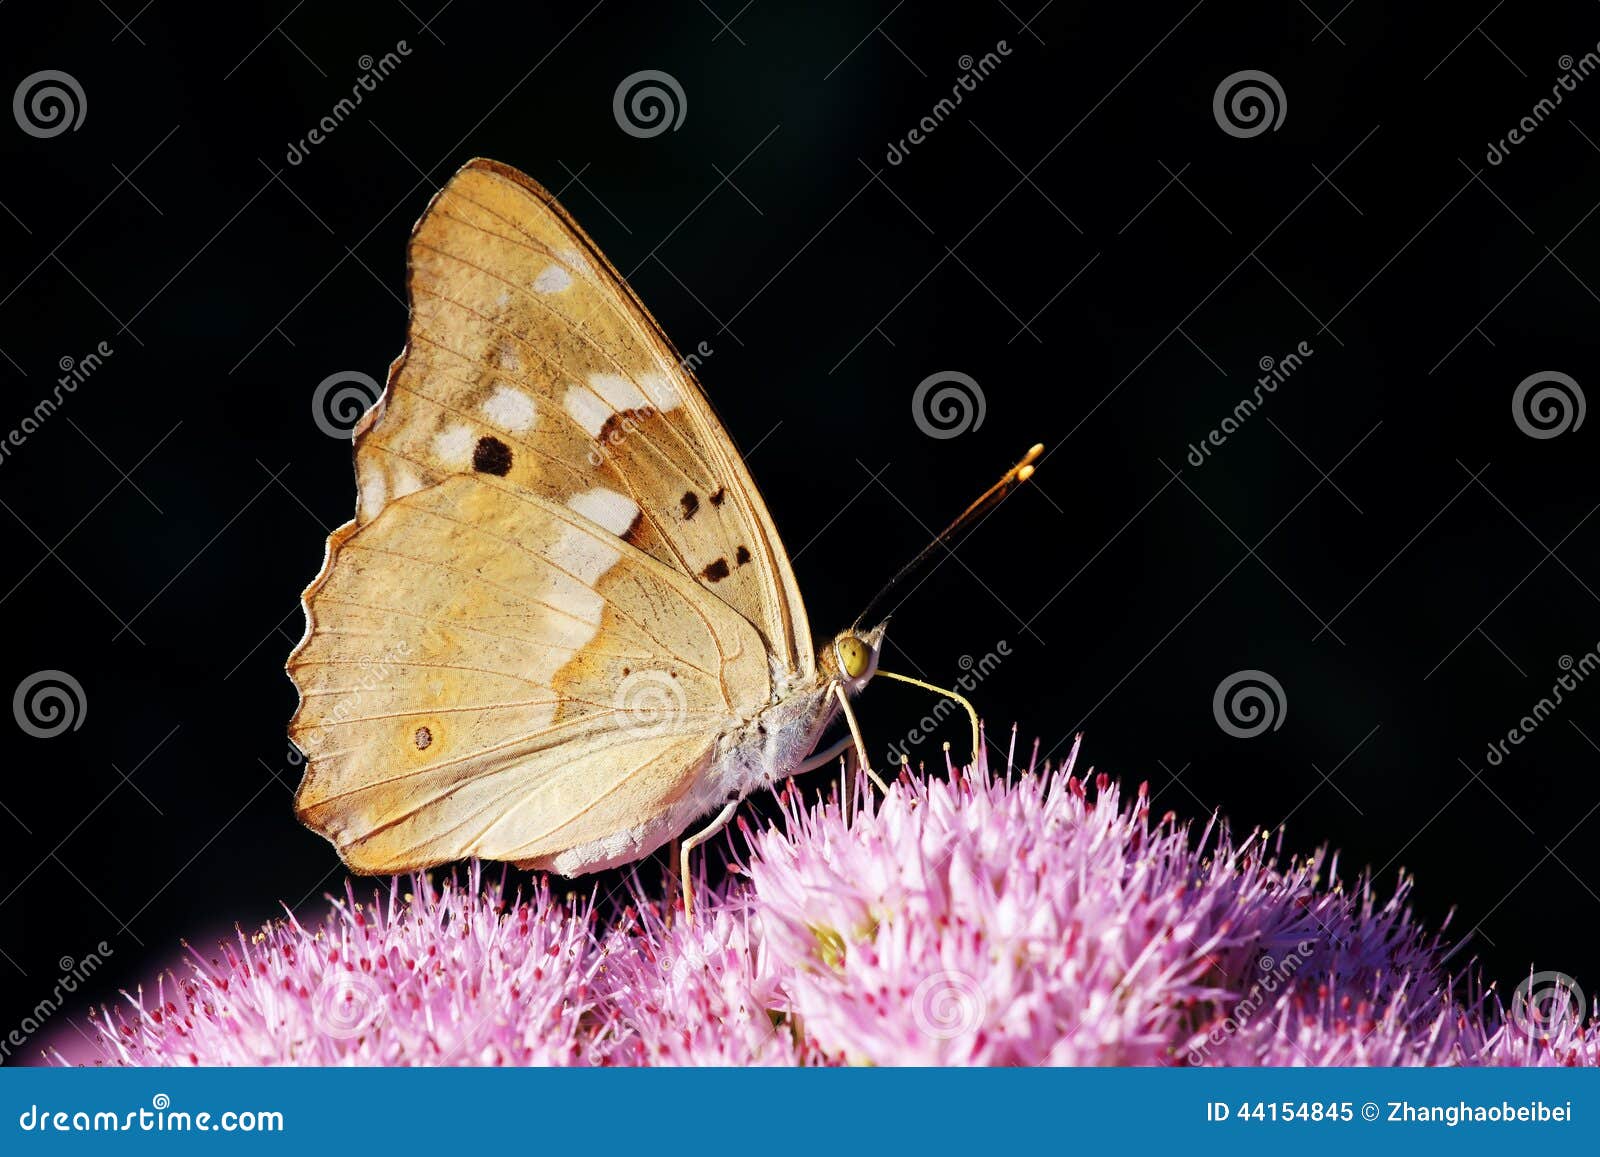 nymphalidae butterfly